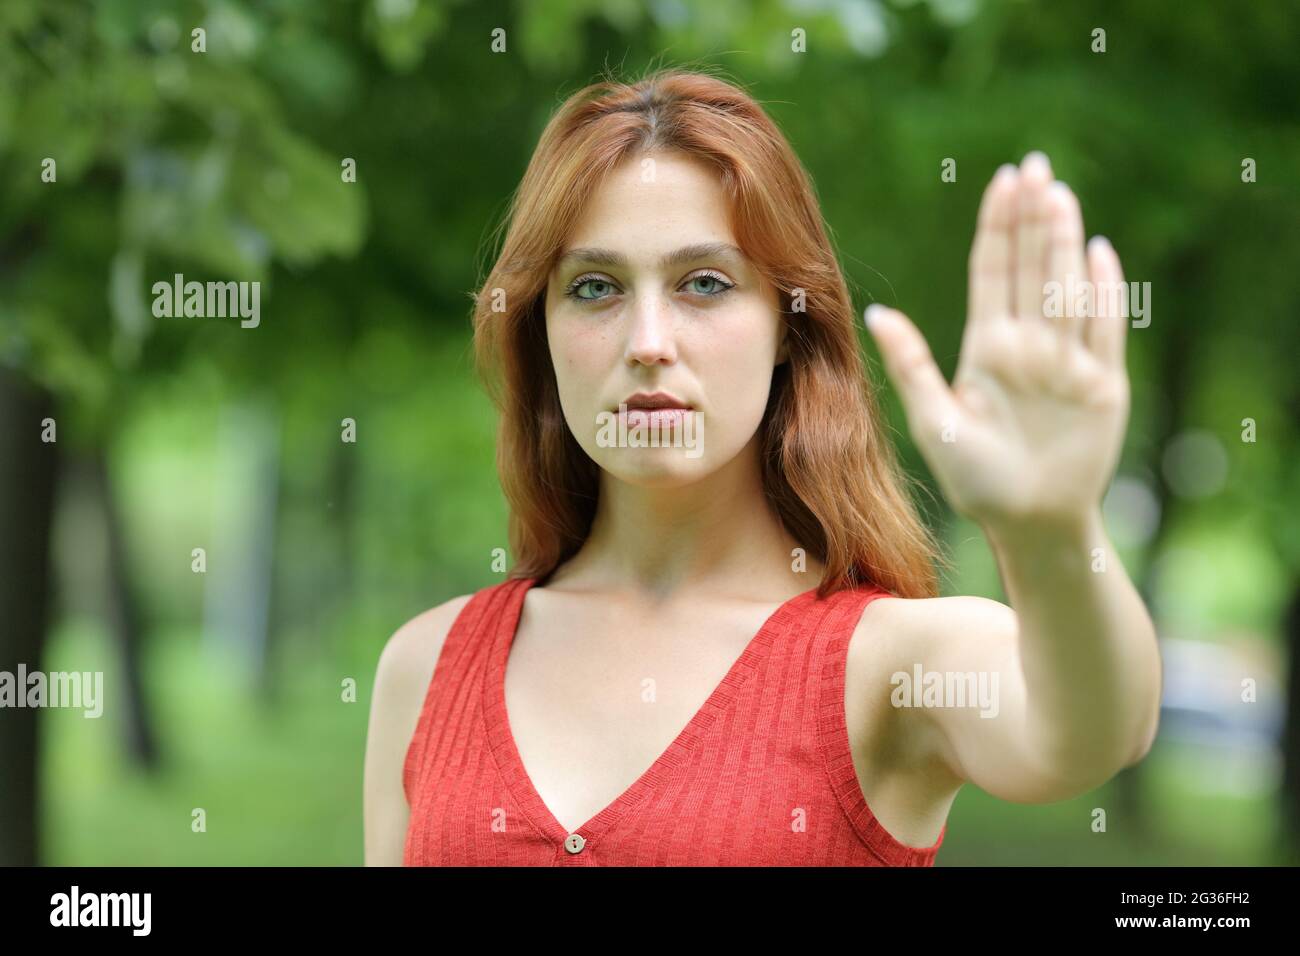 Serious redhead woman gesturing stop with her hand standing in a park Stock Photo